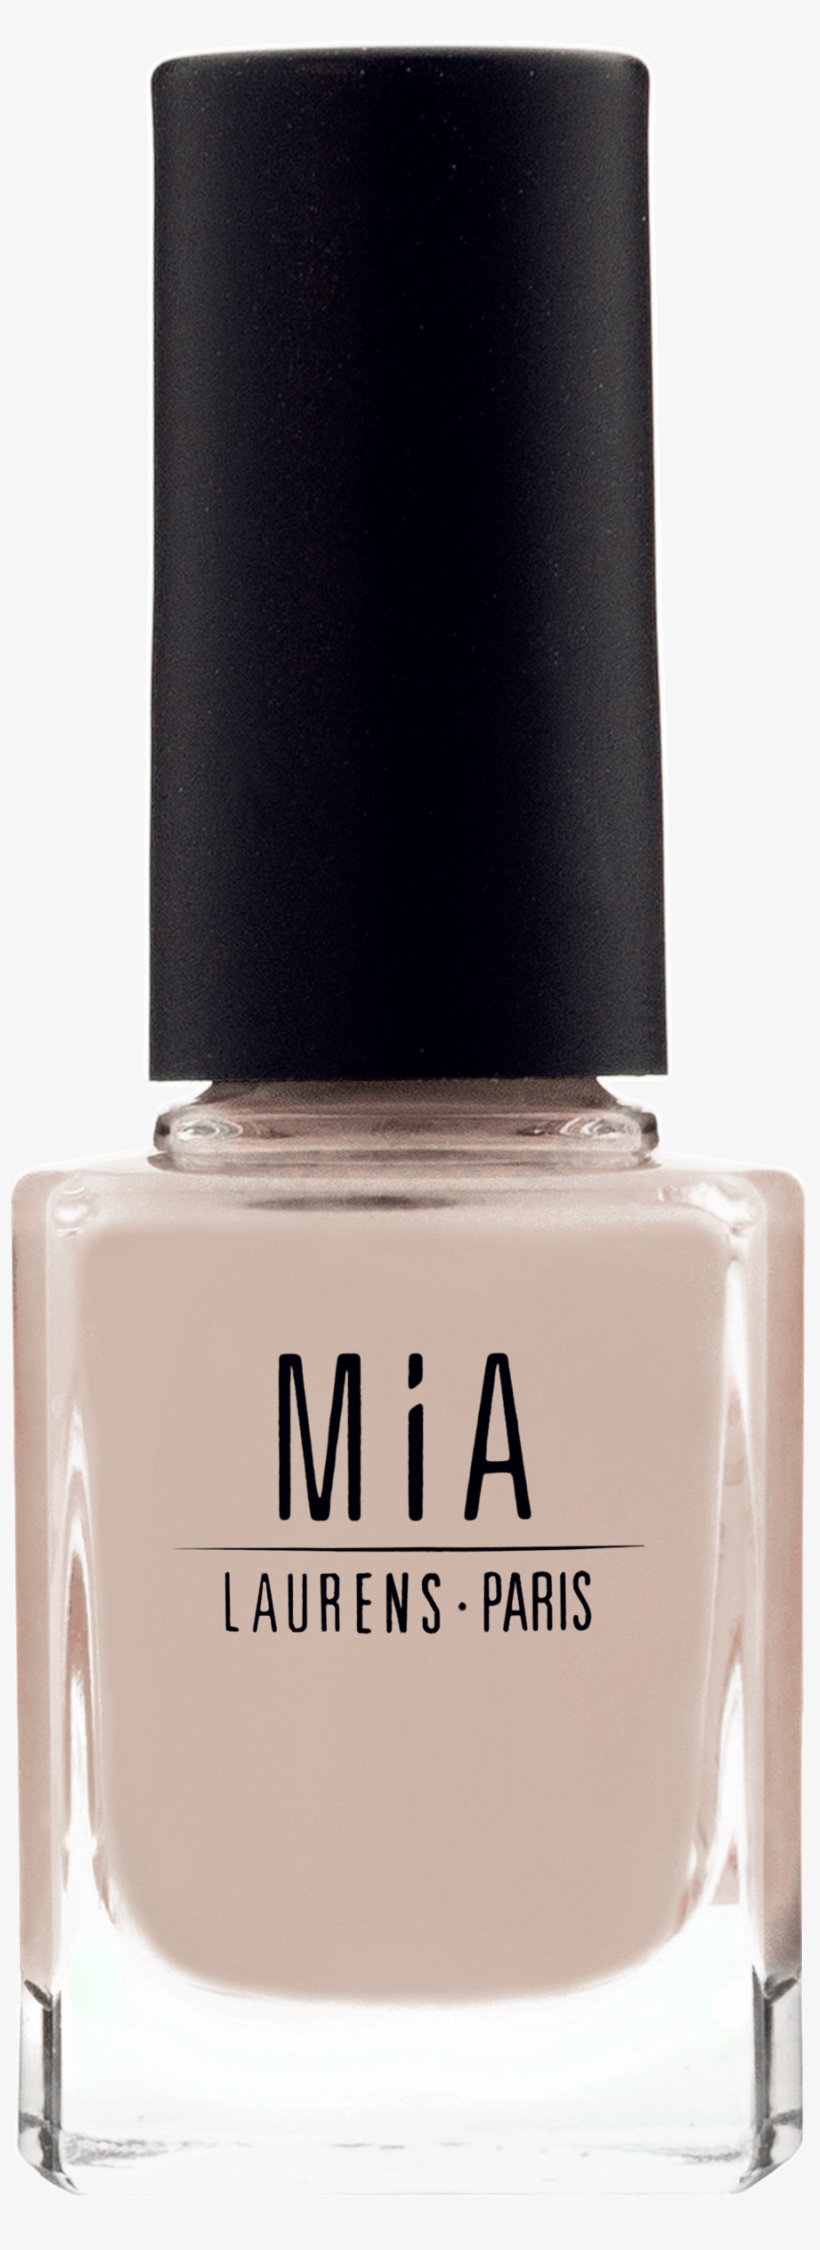 Silver-fog - Mia Laurens Silver Fog Nail Polish - Uk Delivery Only, transparent png #3105978